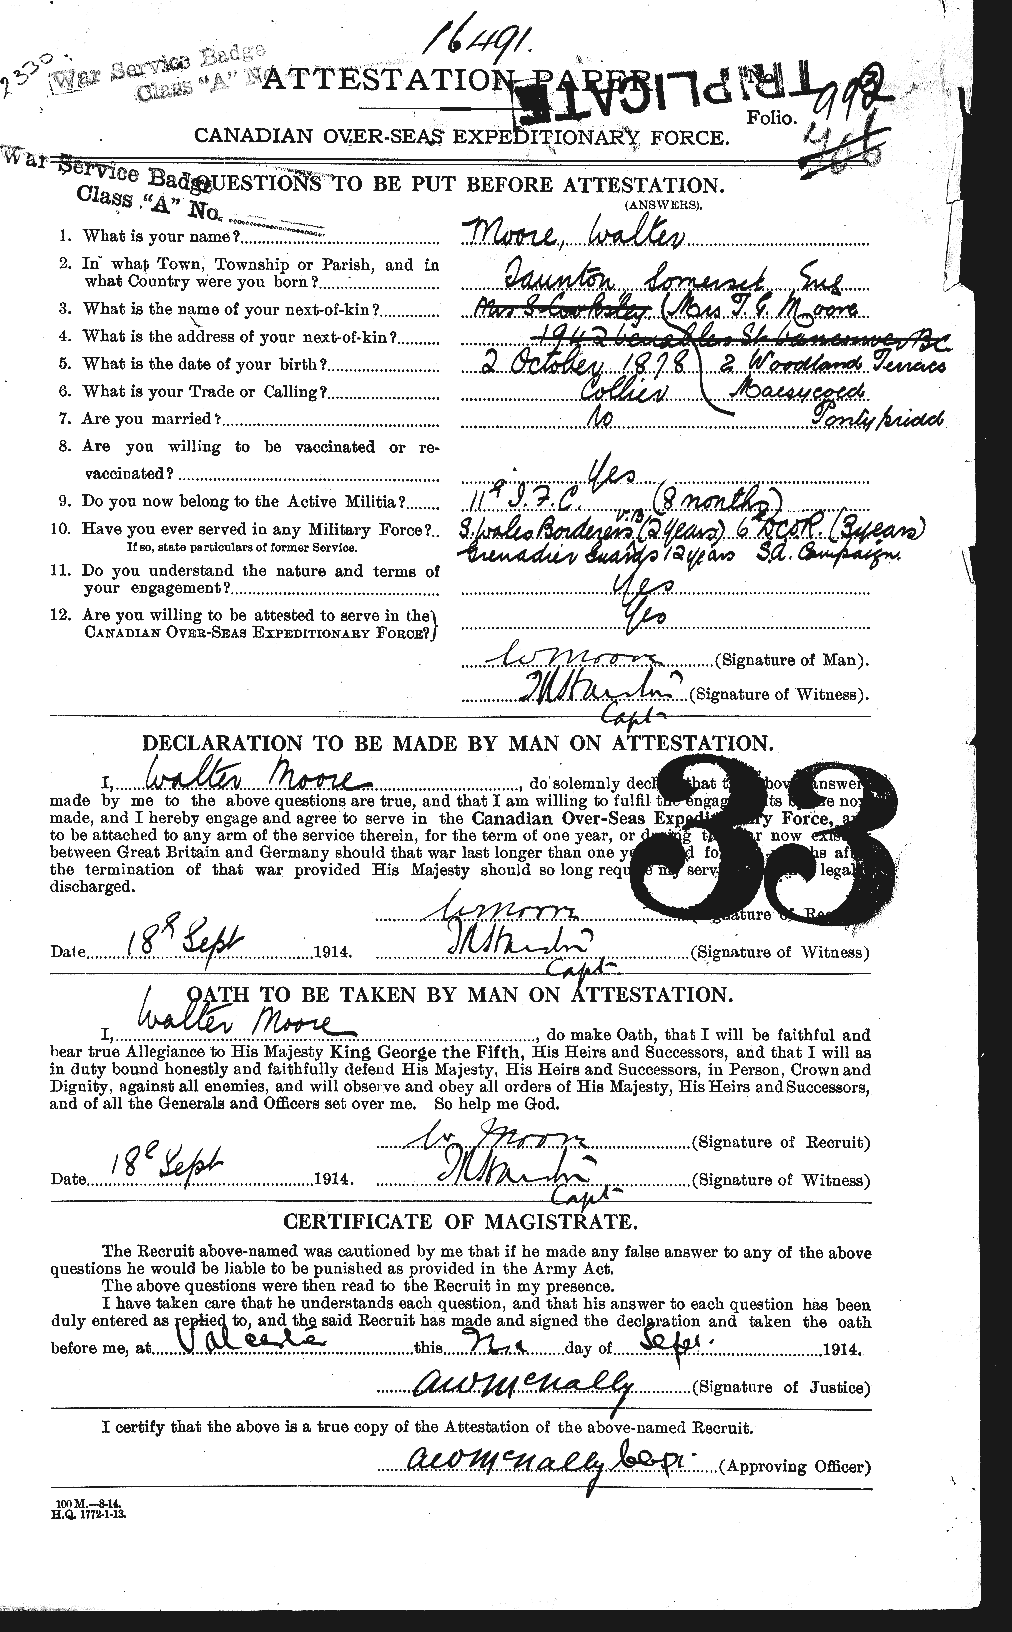 Personnel Records of the First World War - CEF 505695a